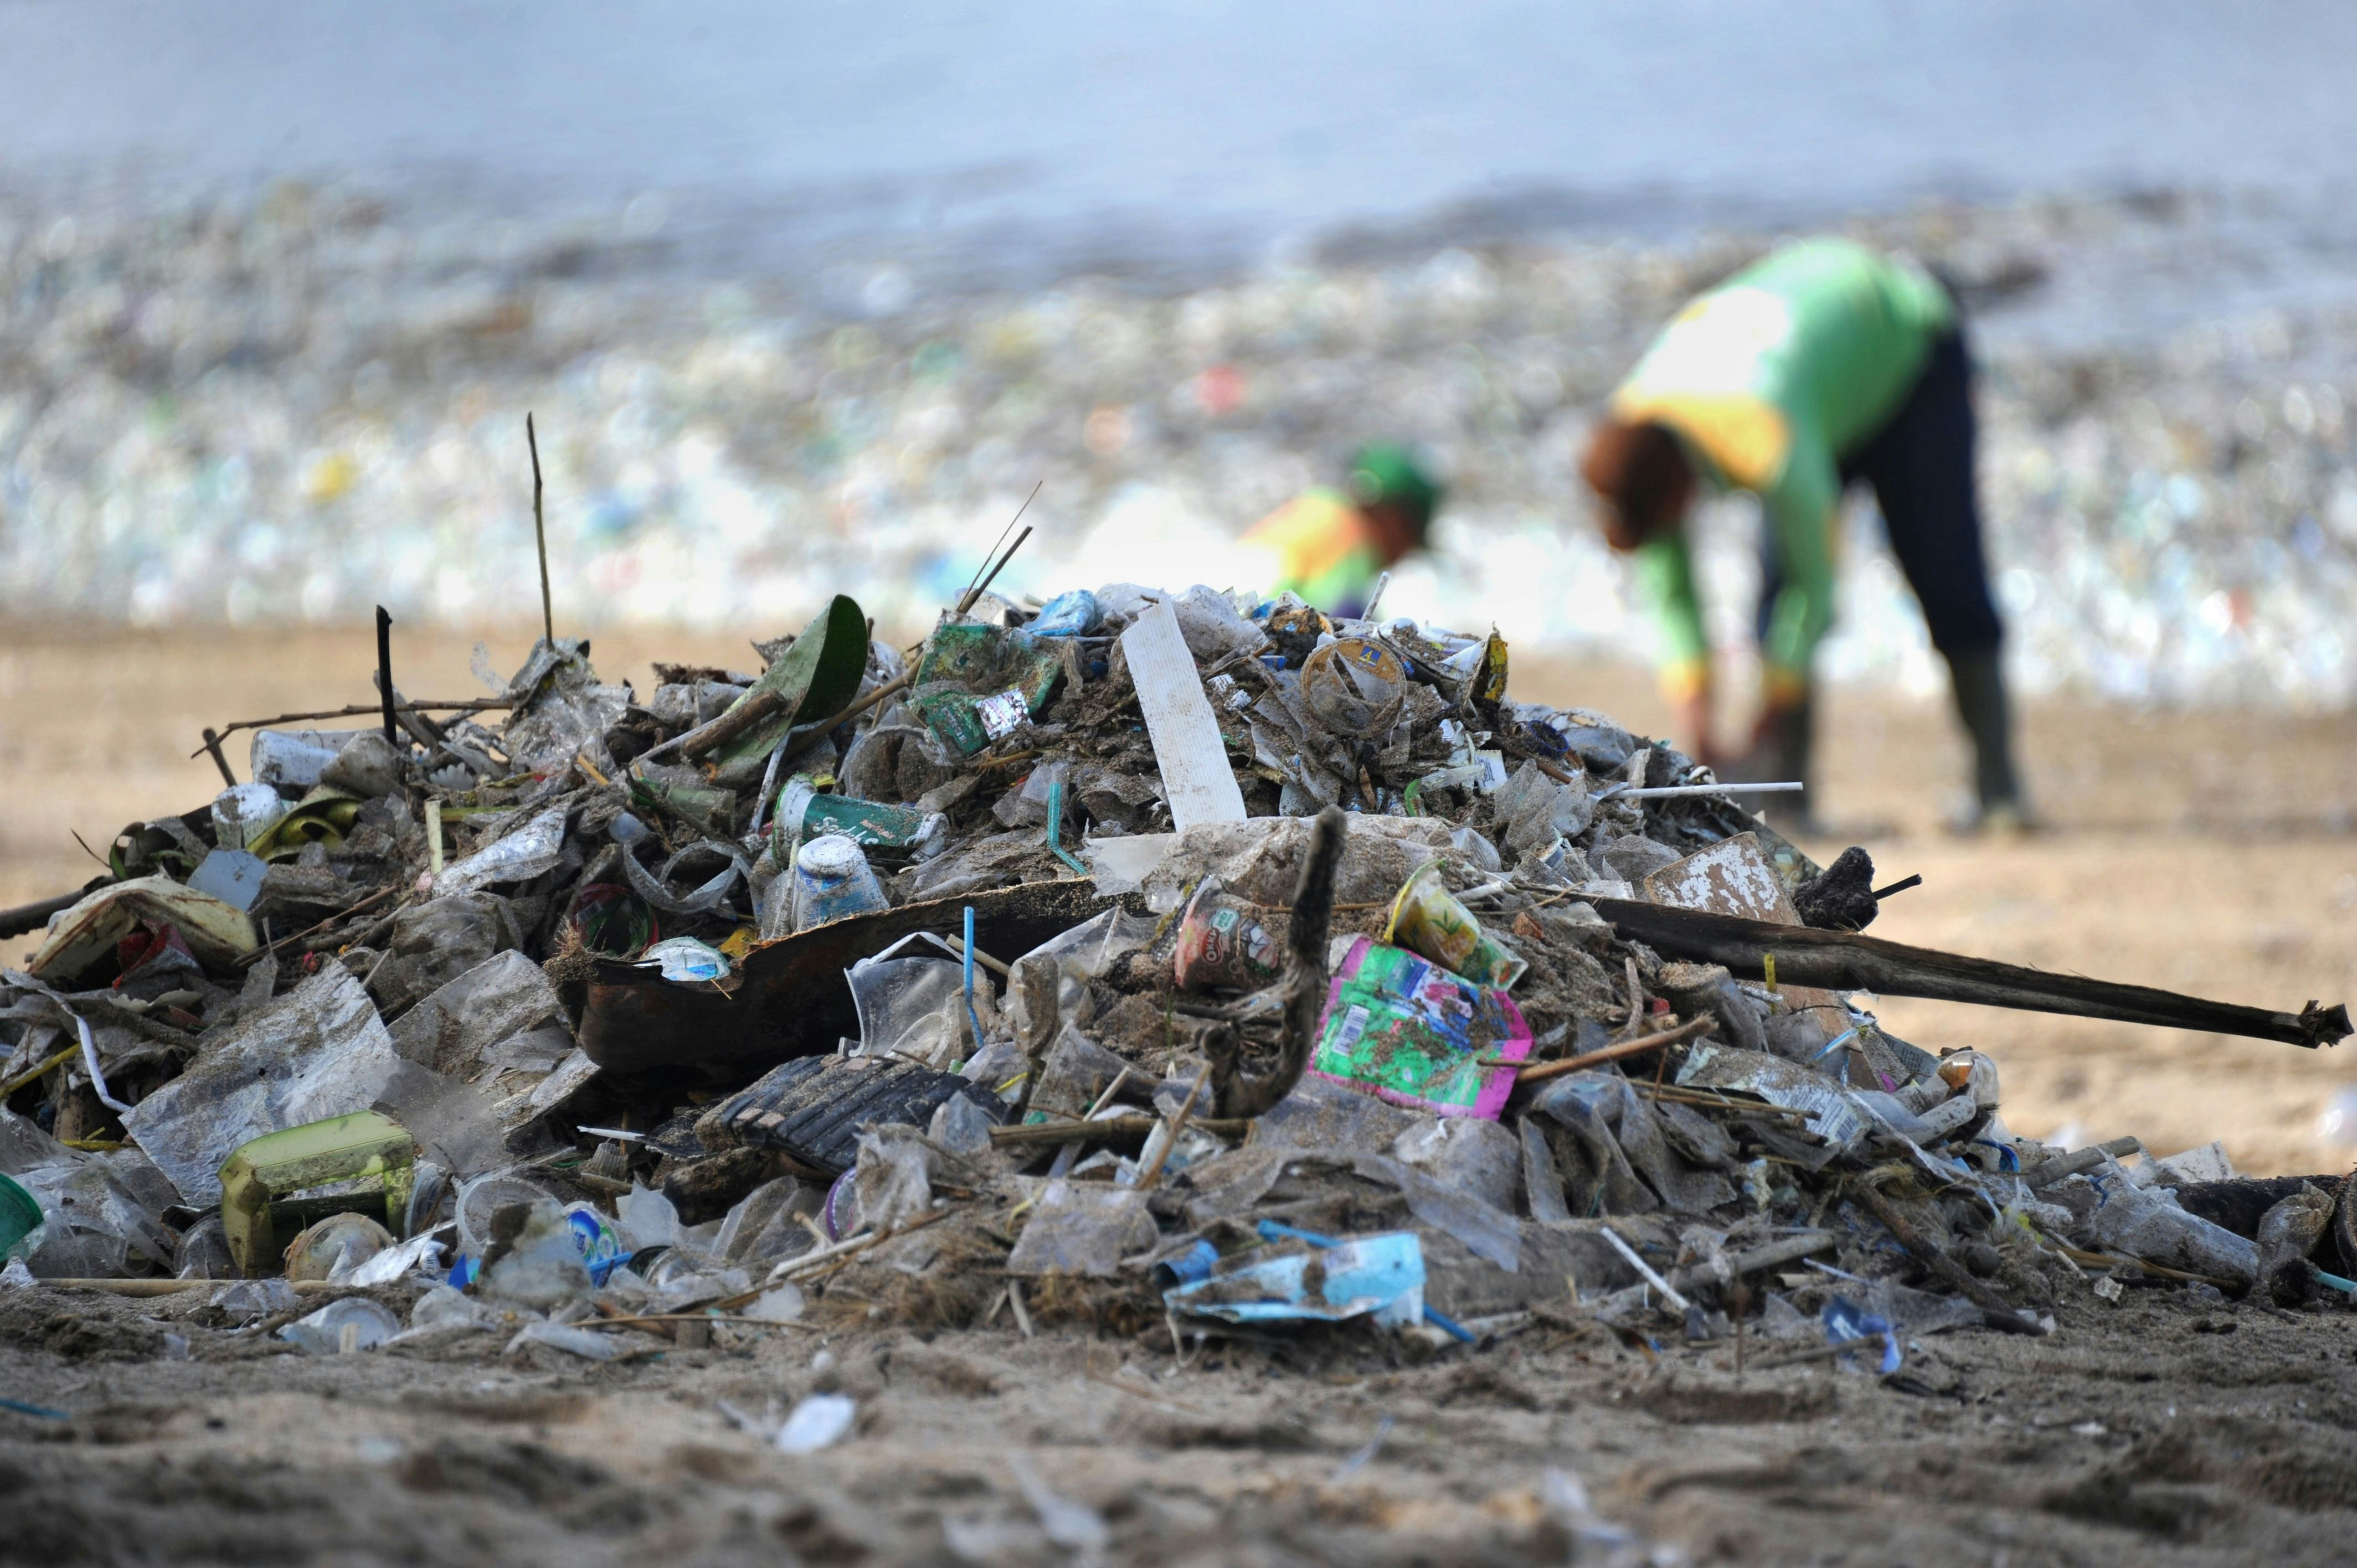 A mound of garbage on Kuta Beach in Bali. In the distance, and slightly out of focus, two people work to clear the litter from the sand.